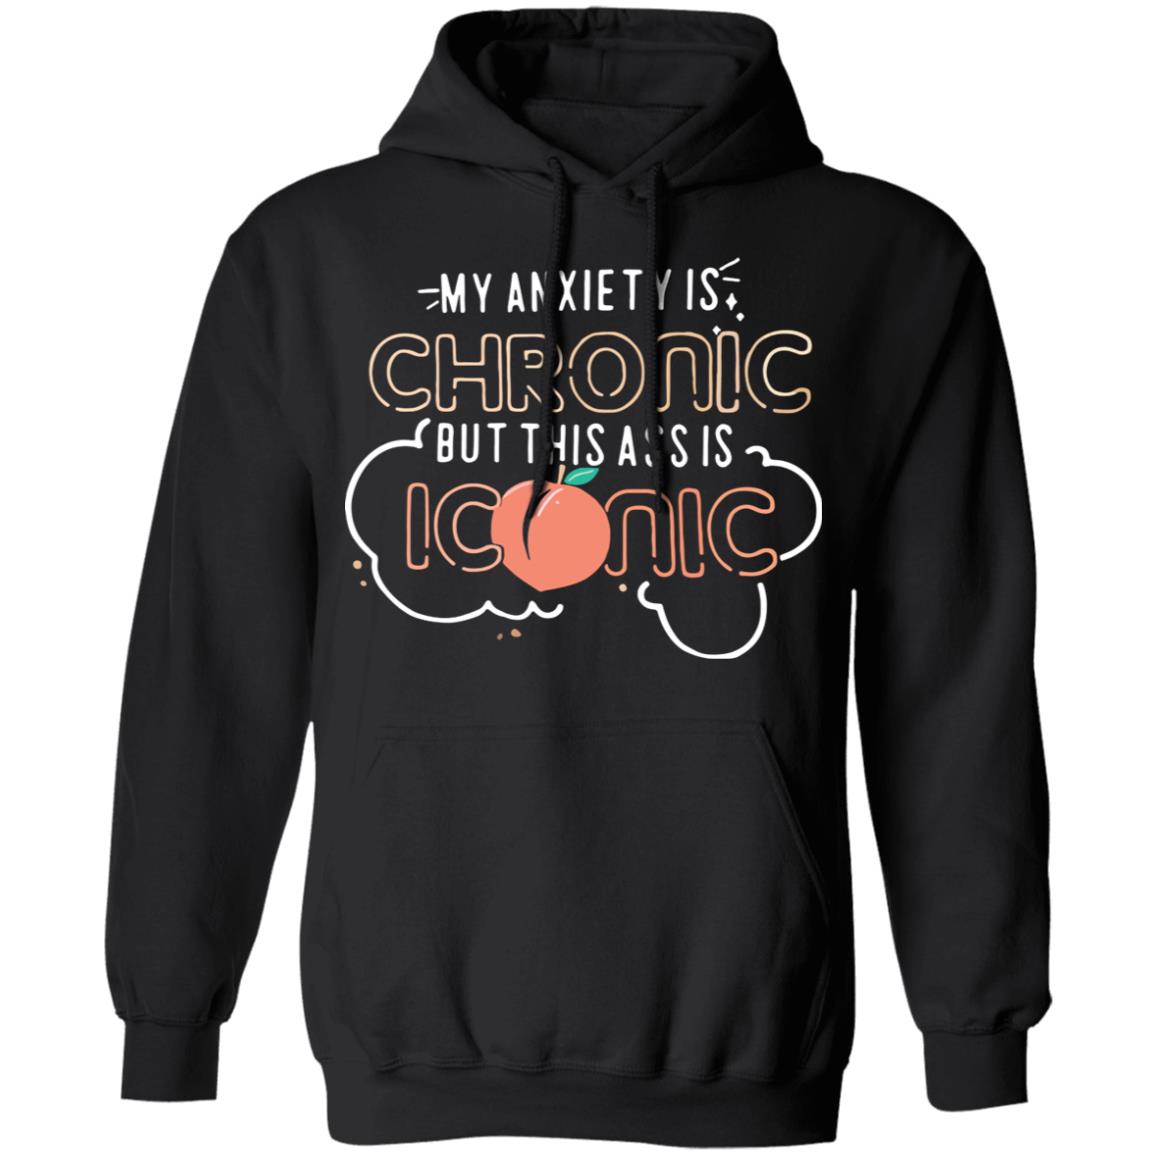 Funny Peach Sarcasm Sarcastic Sassy Peach Gift Shirt Tank Top 1Zmb Retro My Anxiety Is Chronic But This Ass Is Iconic